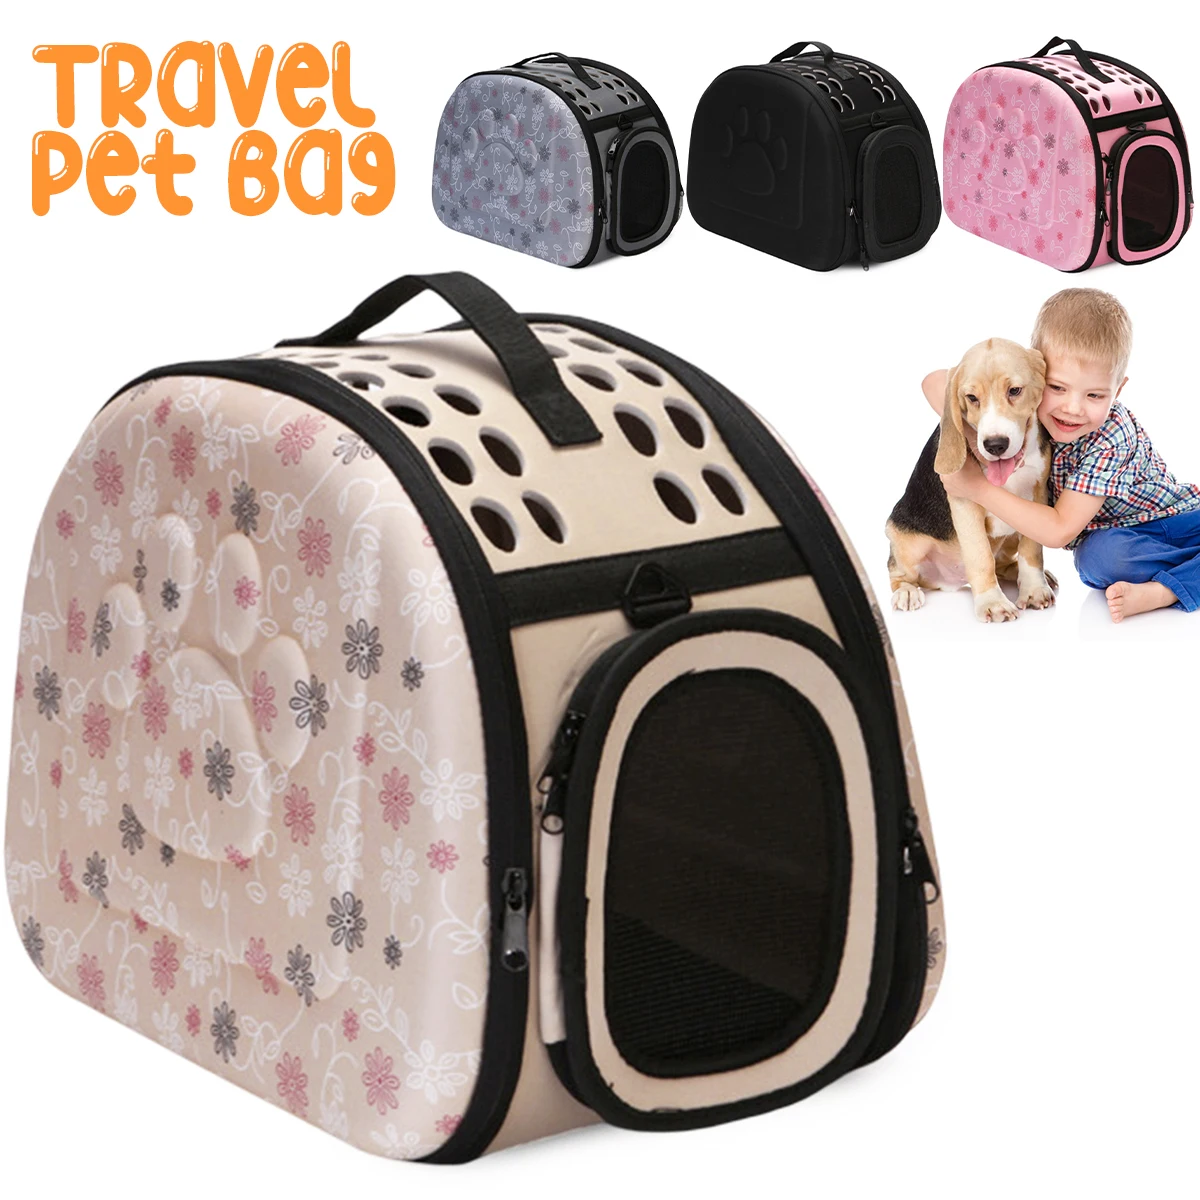 

Portable Dog Carrier Bag Pet Puppy Travel Bags Breathable Mesh Bags for Small Dogs Cat Chihuahua Carrier Outgoing Pets Handbag